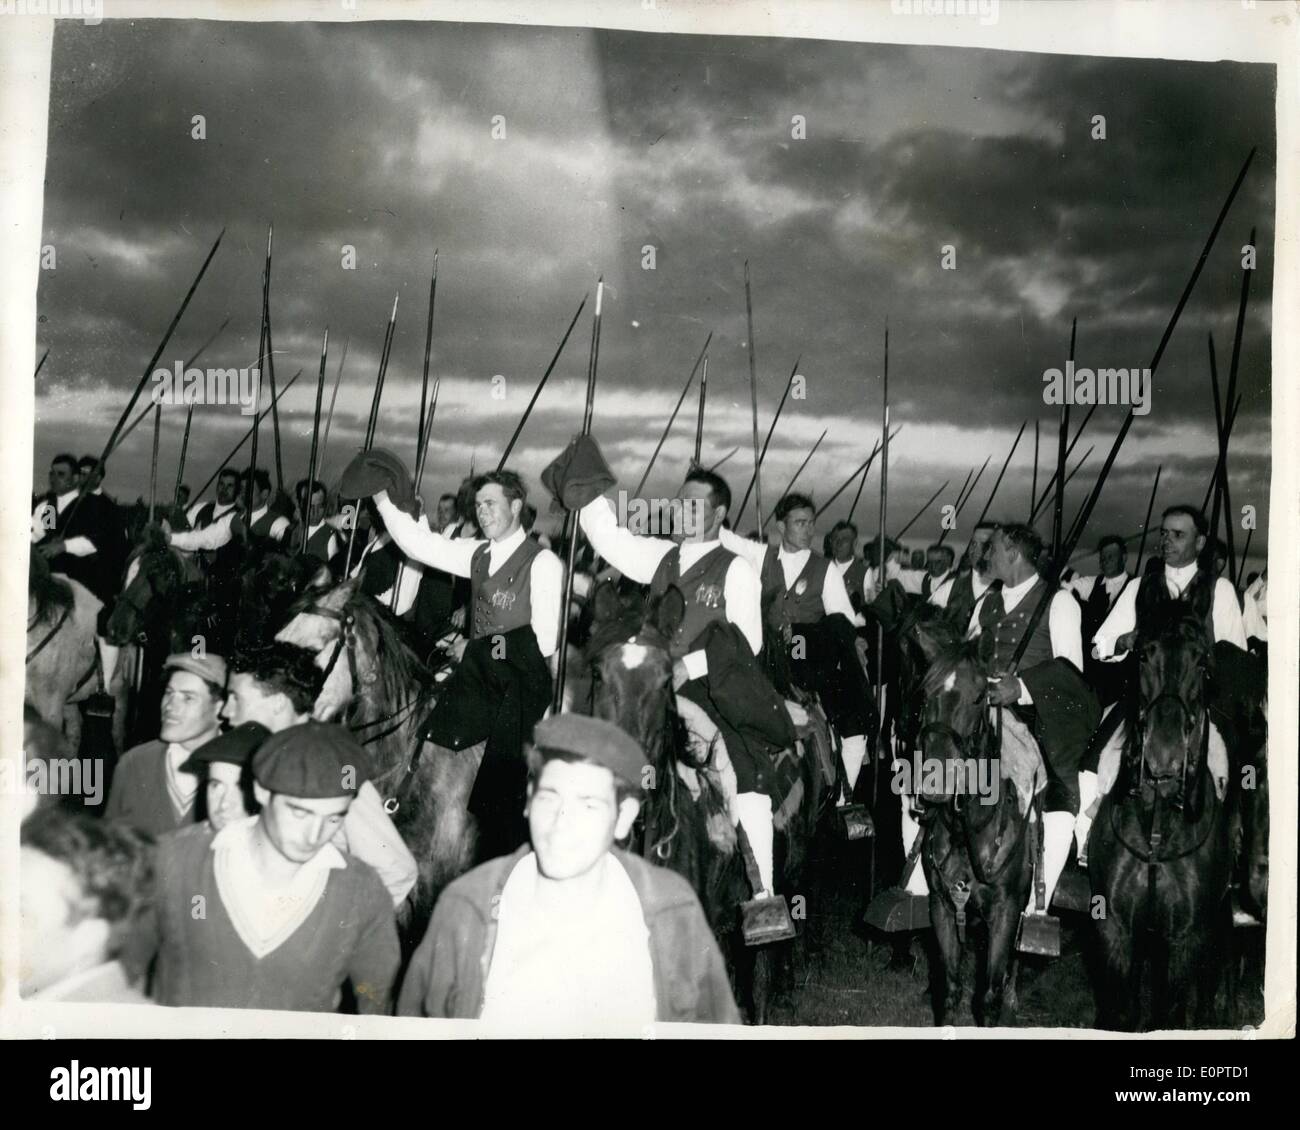 Feb. 02, 1957 - Queen Visits Bull Farm - Villa Franca - Portugal. Photo shows Scene during the Queen's visit to the Bull Farm, Vila Franca, Portugal - showing some of the mounted ''Campinos'' - who waves their long poles in greeting. Stock Photo